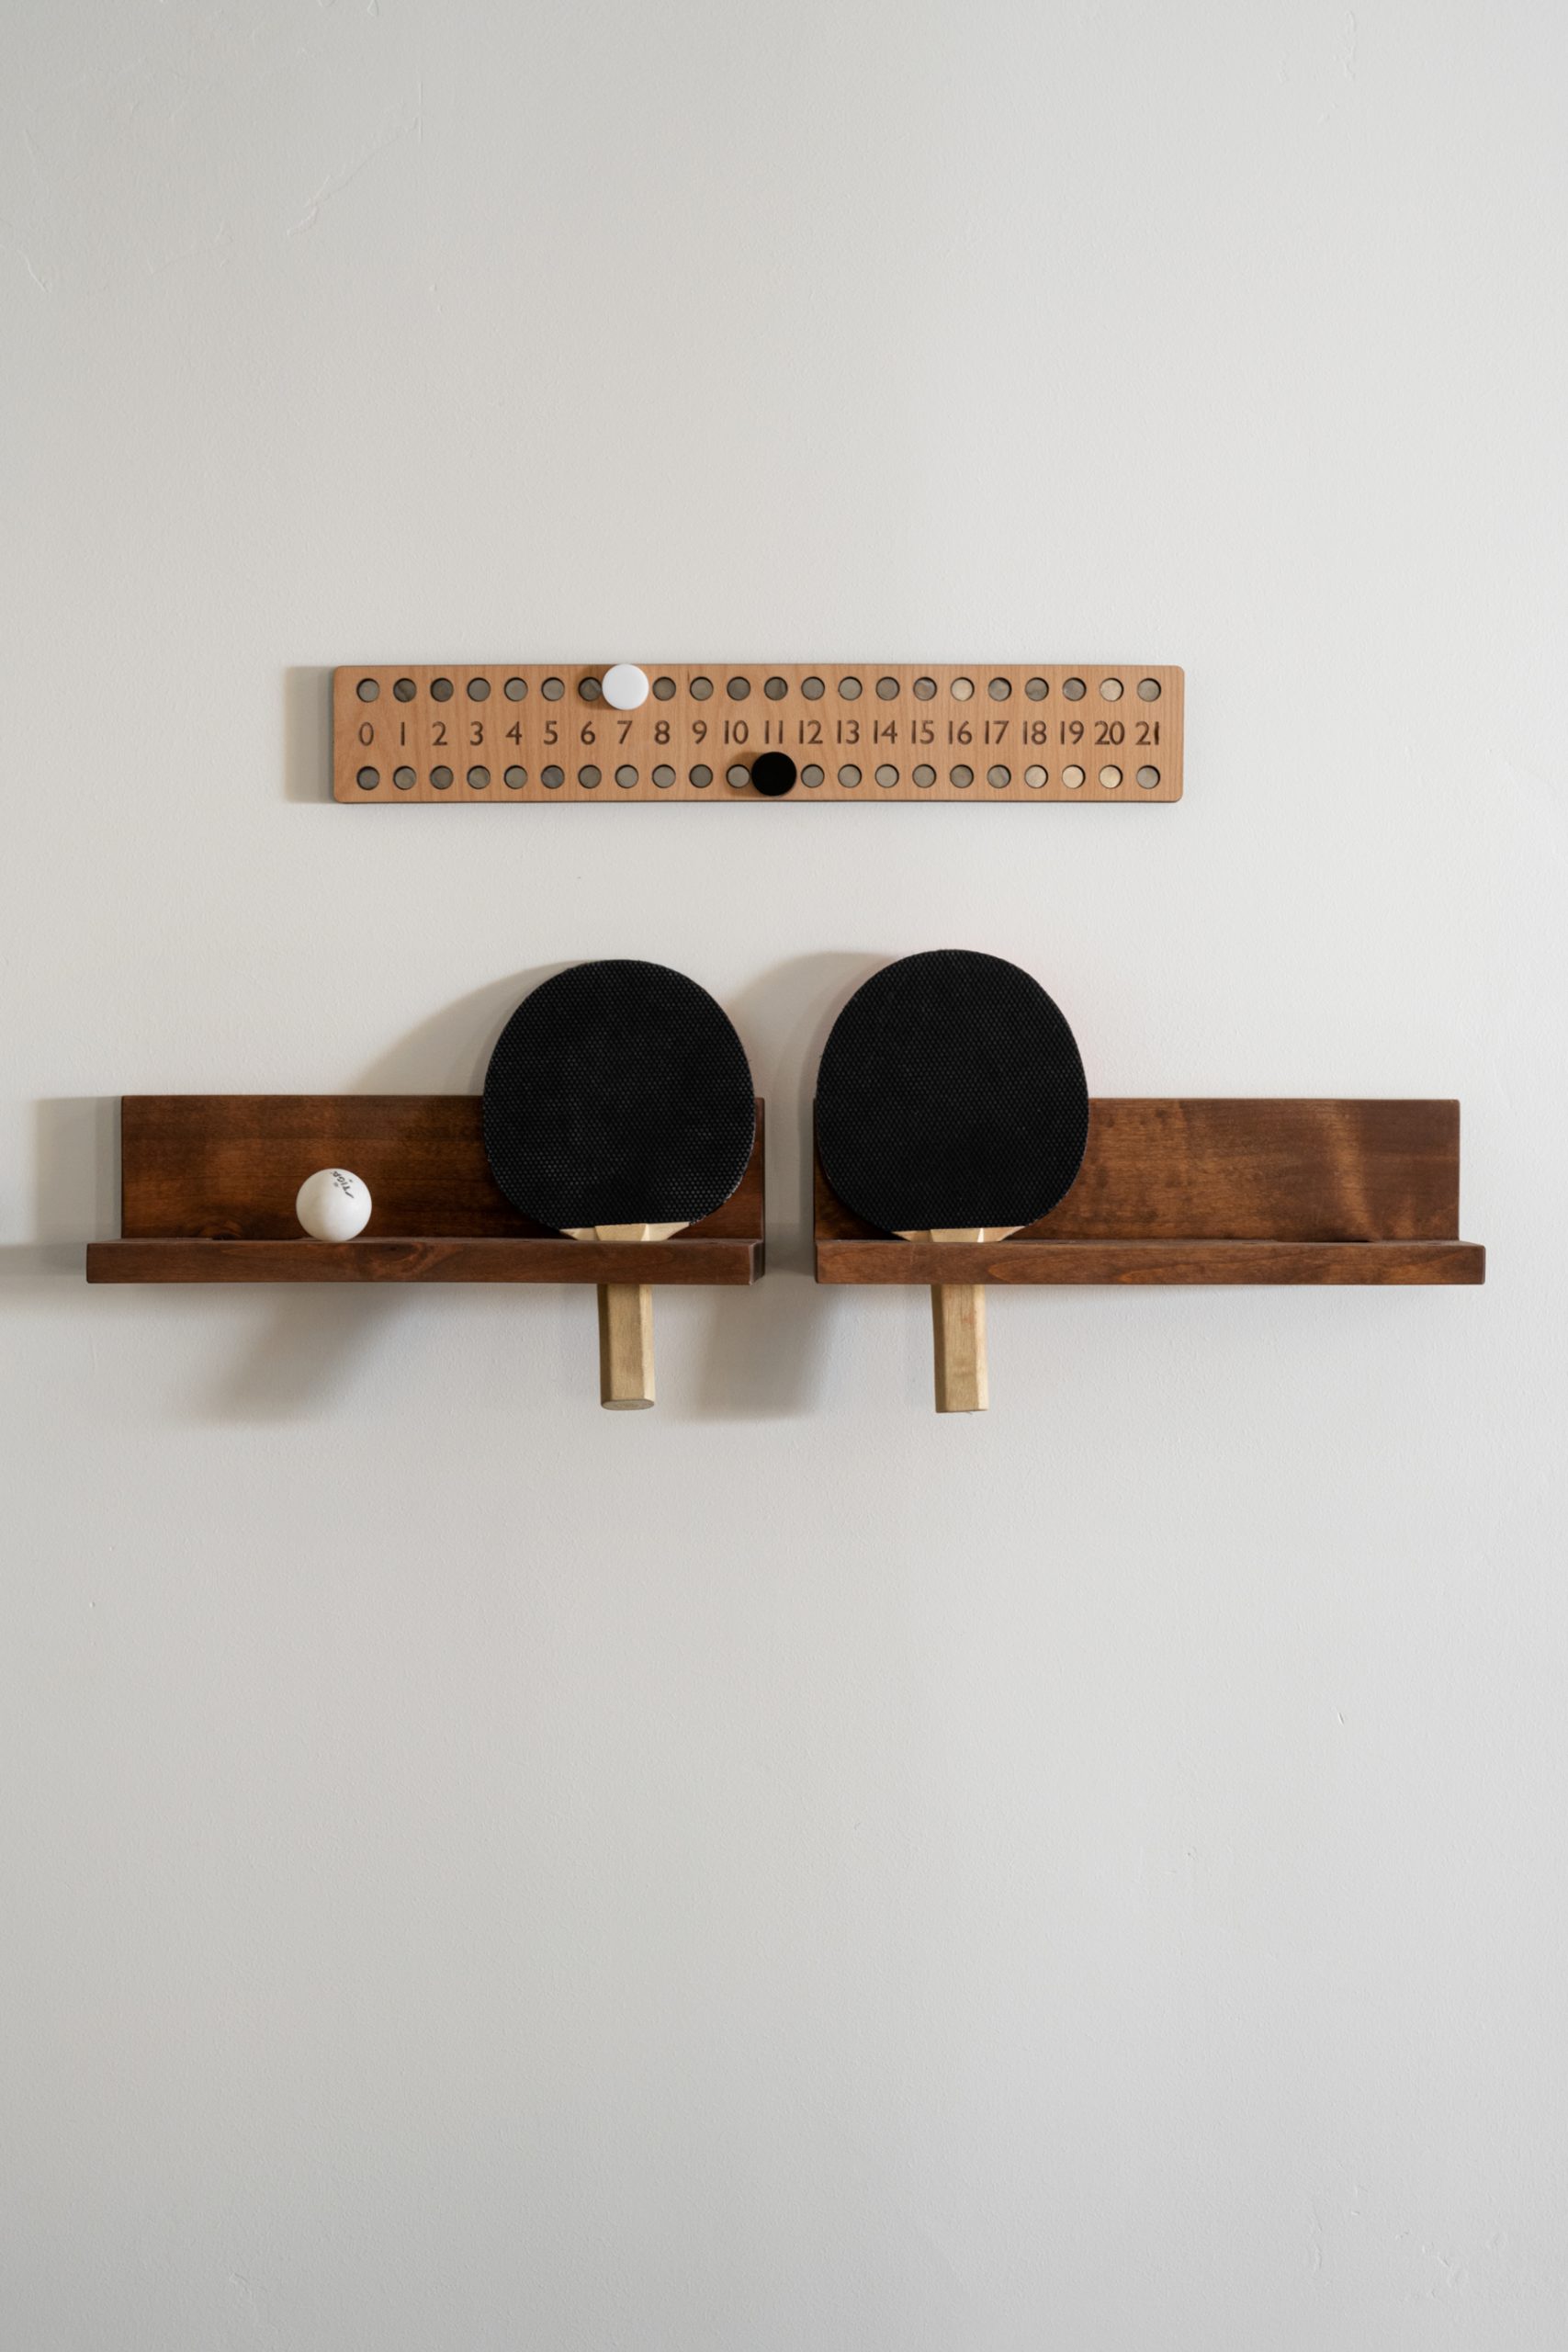 basement with shelf holding ping pong paddles